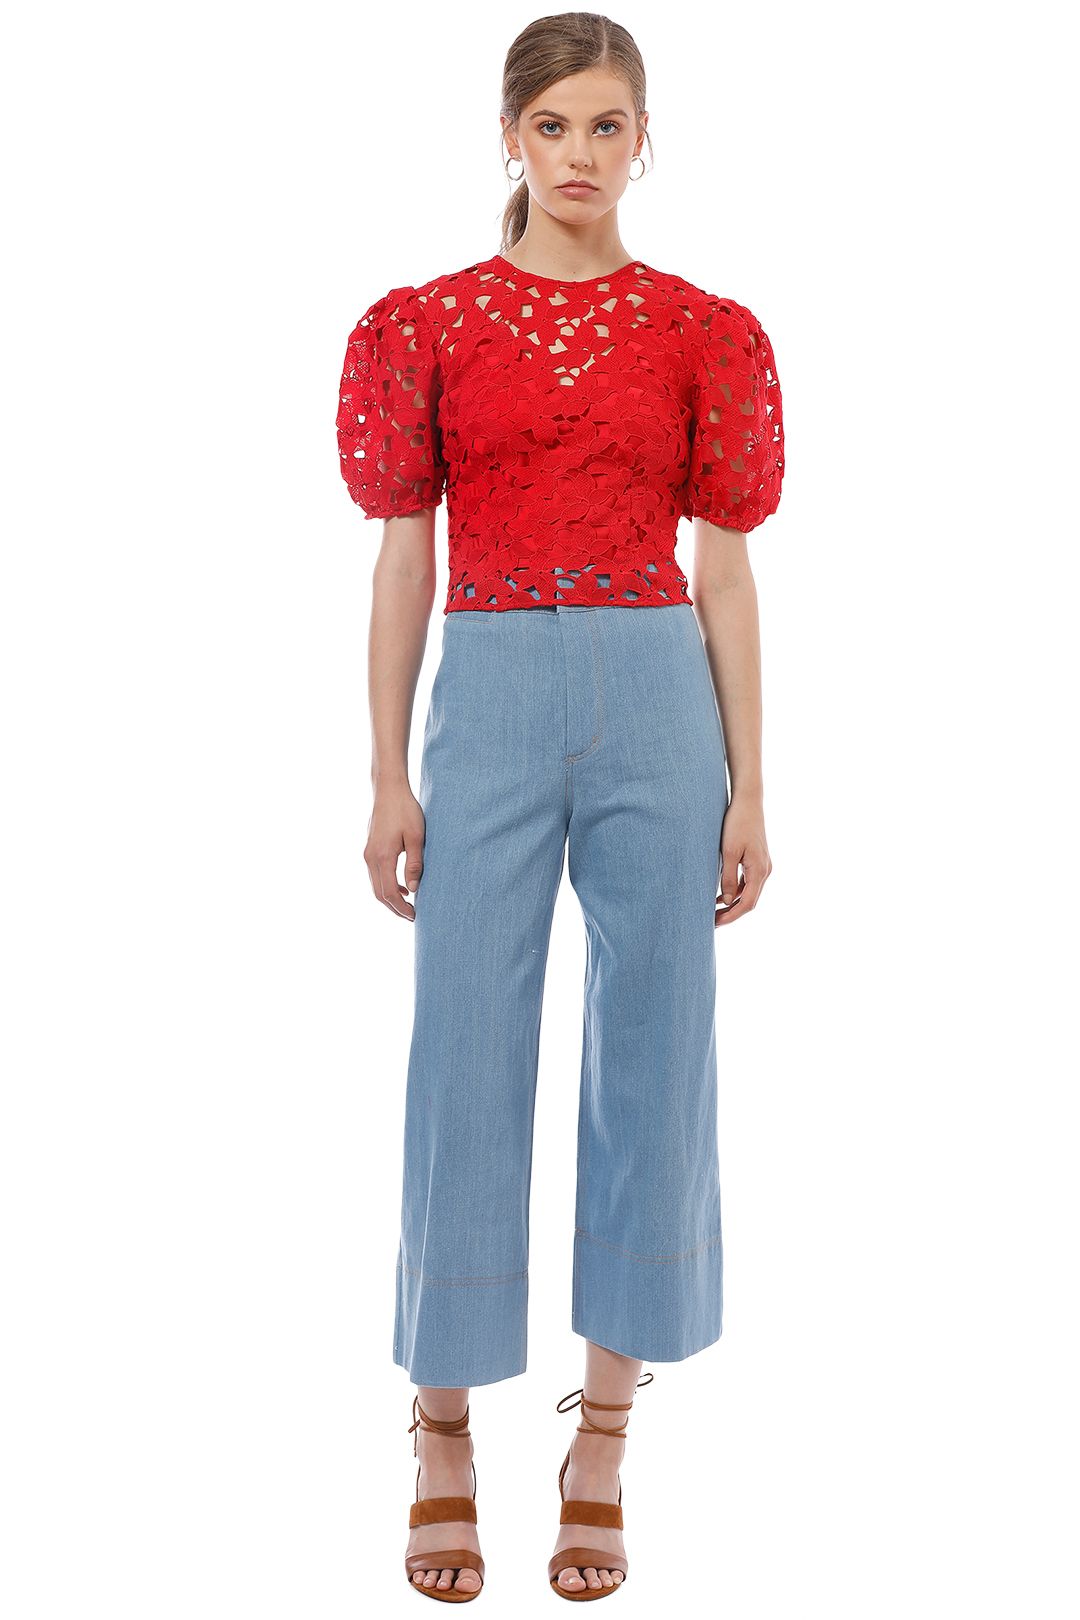 Keepsake the Label - Headlines Lace Top - Red - Front